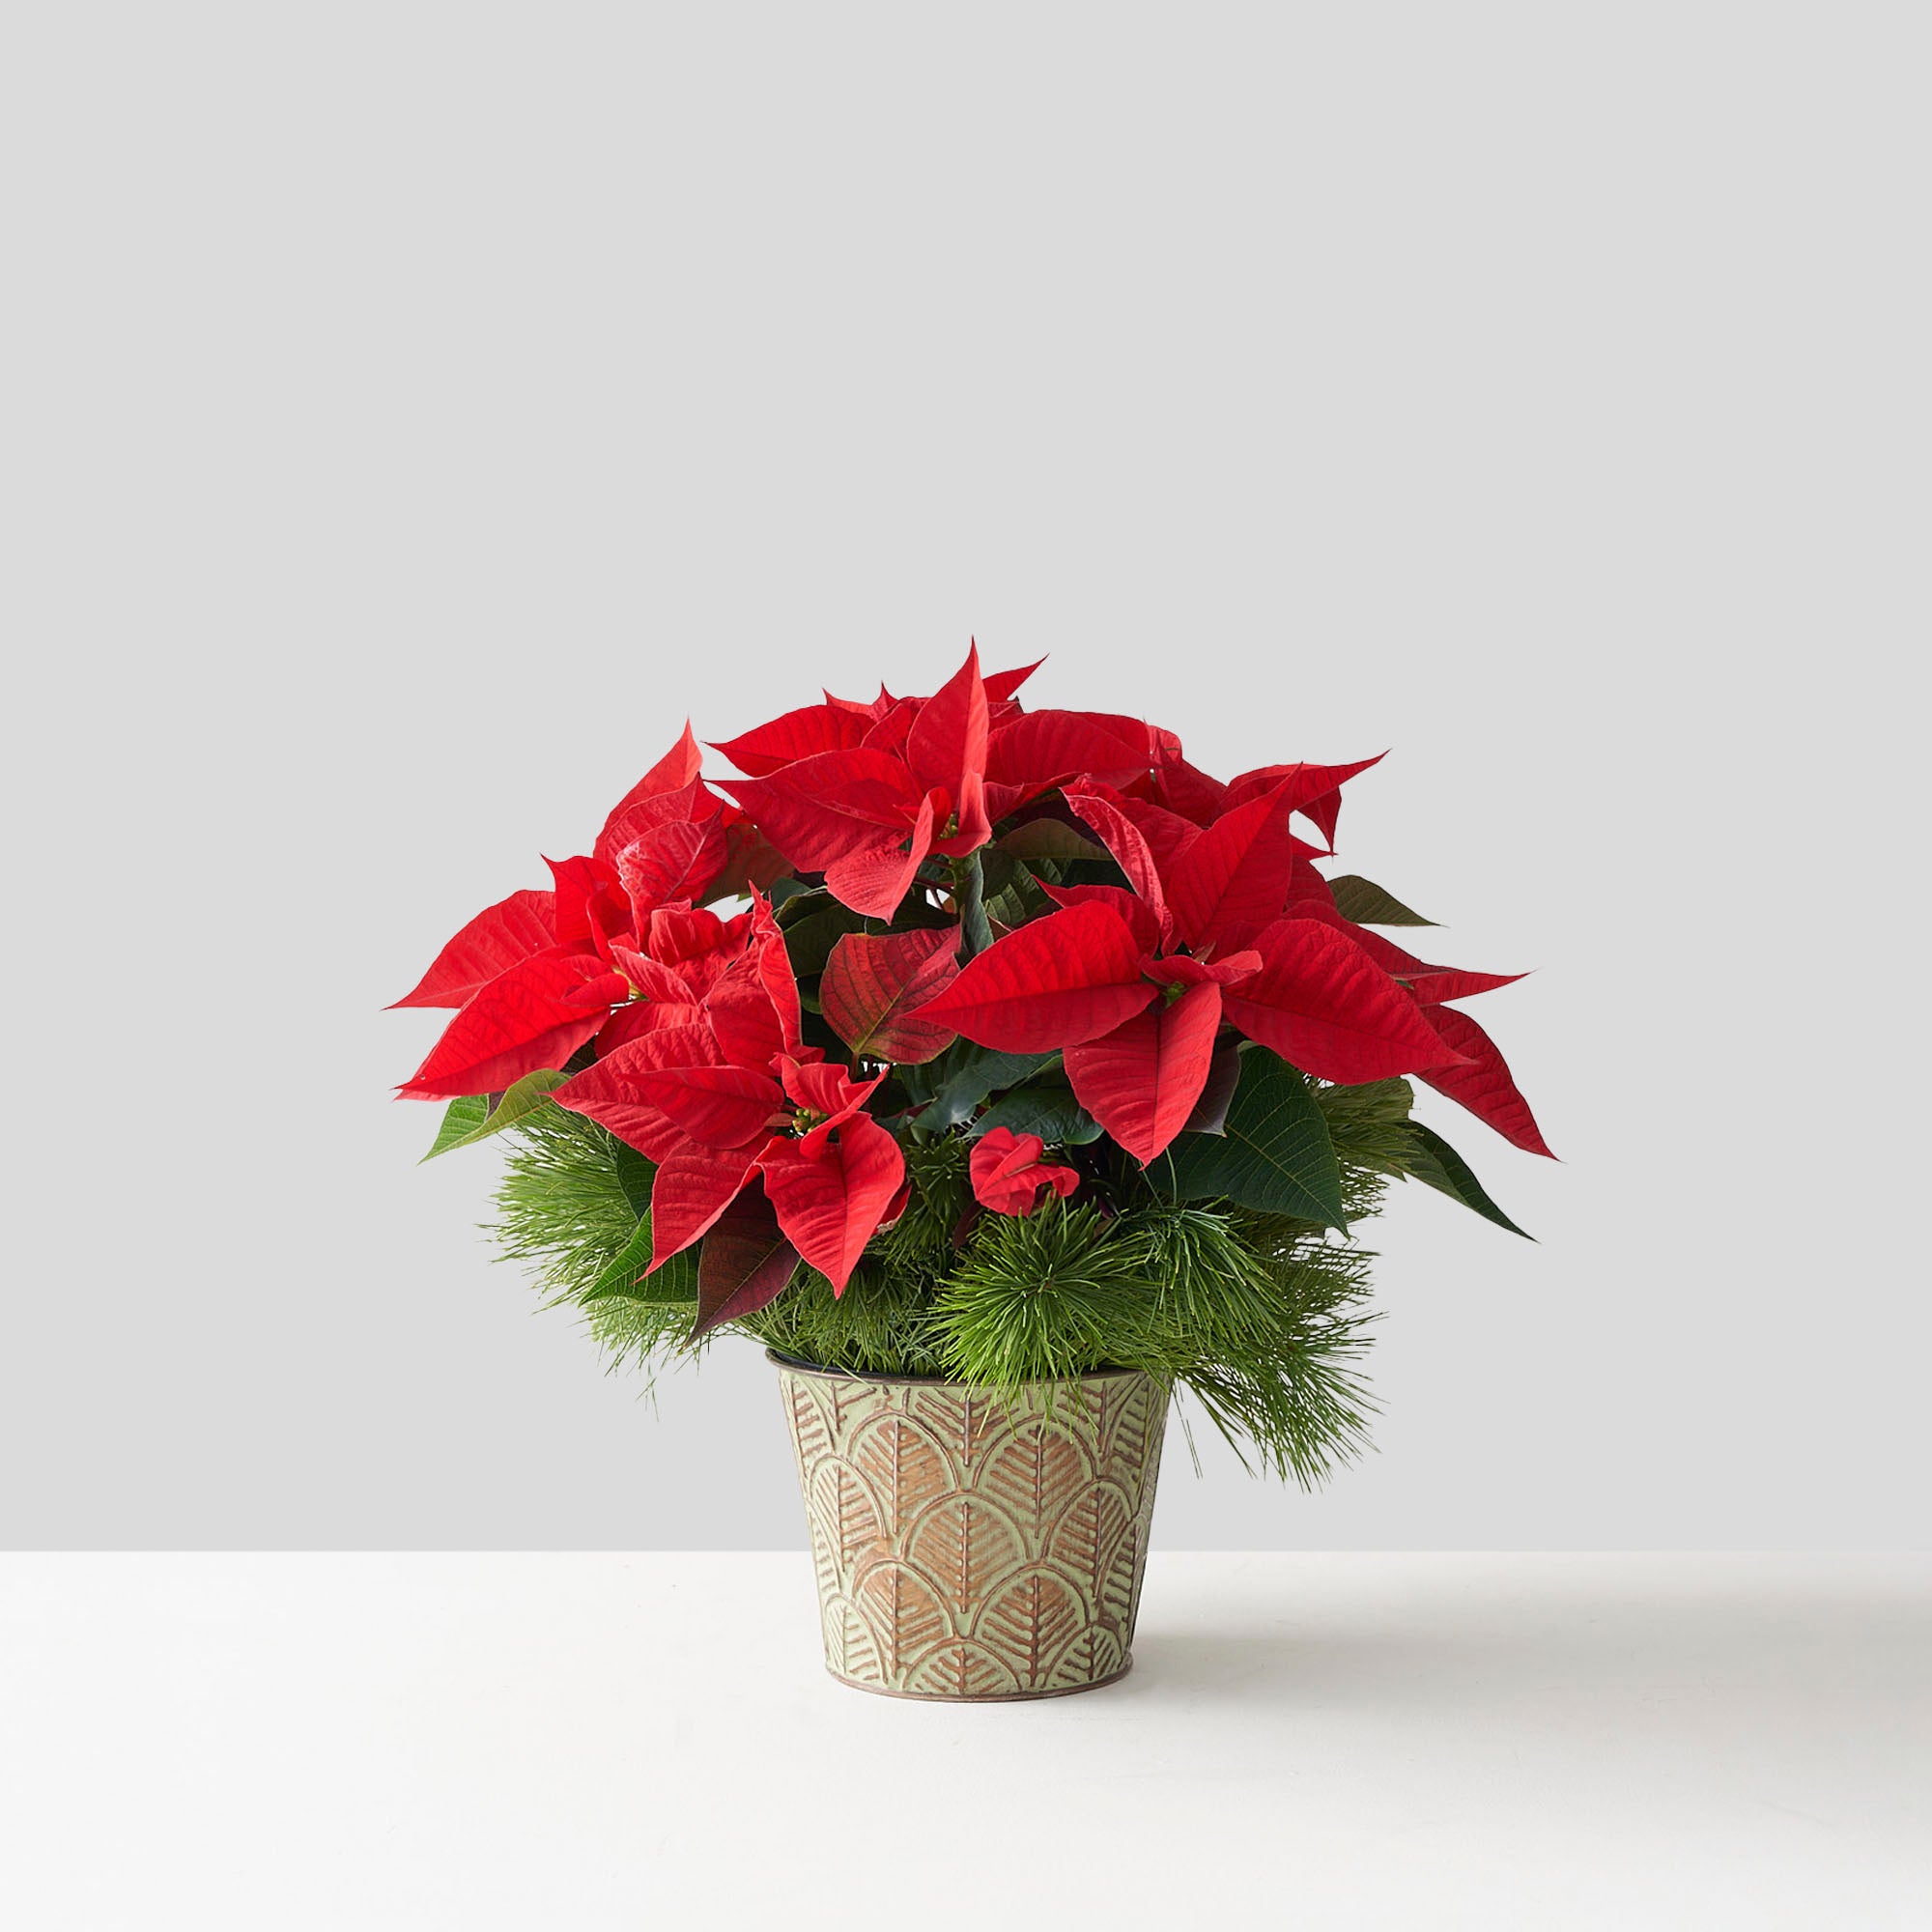 Red poinsettia in tin pot with pine boughs.